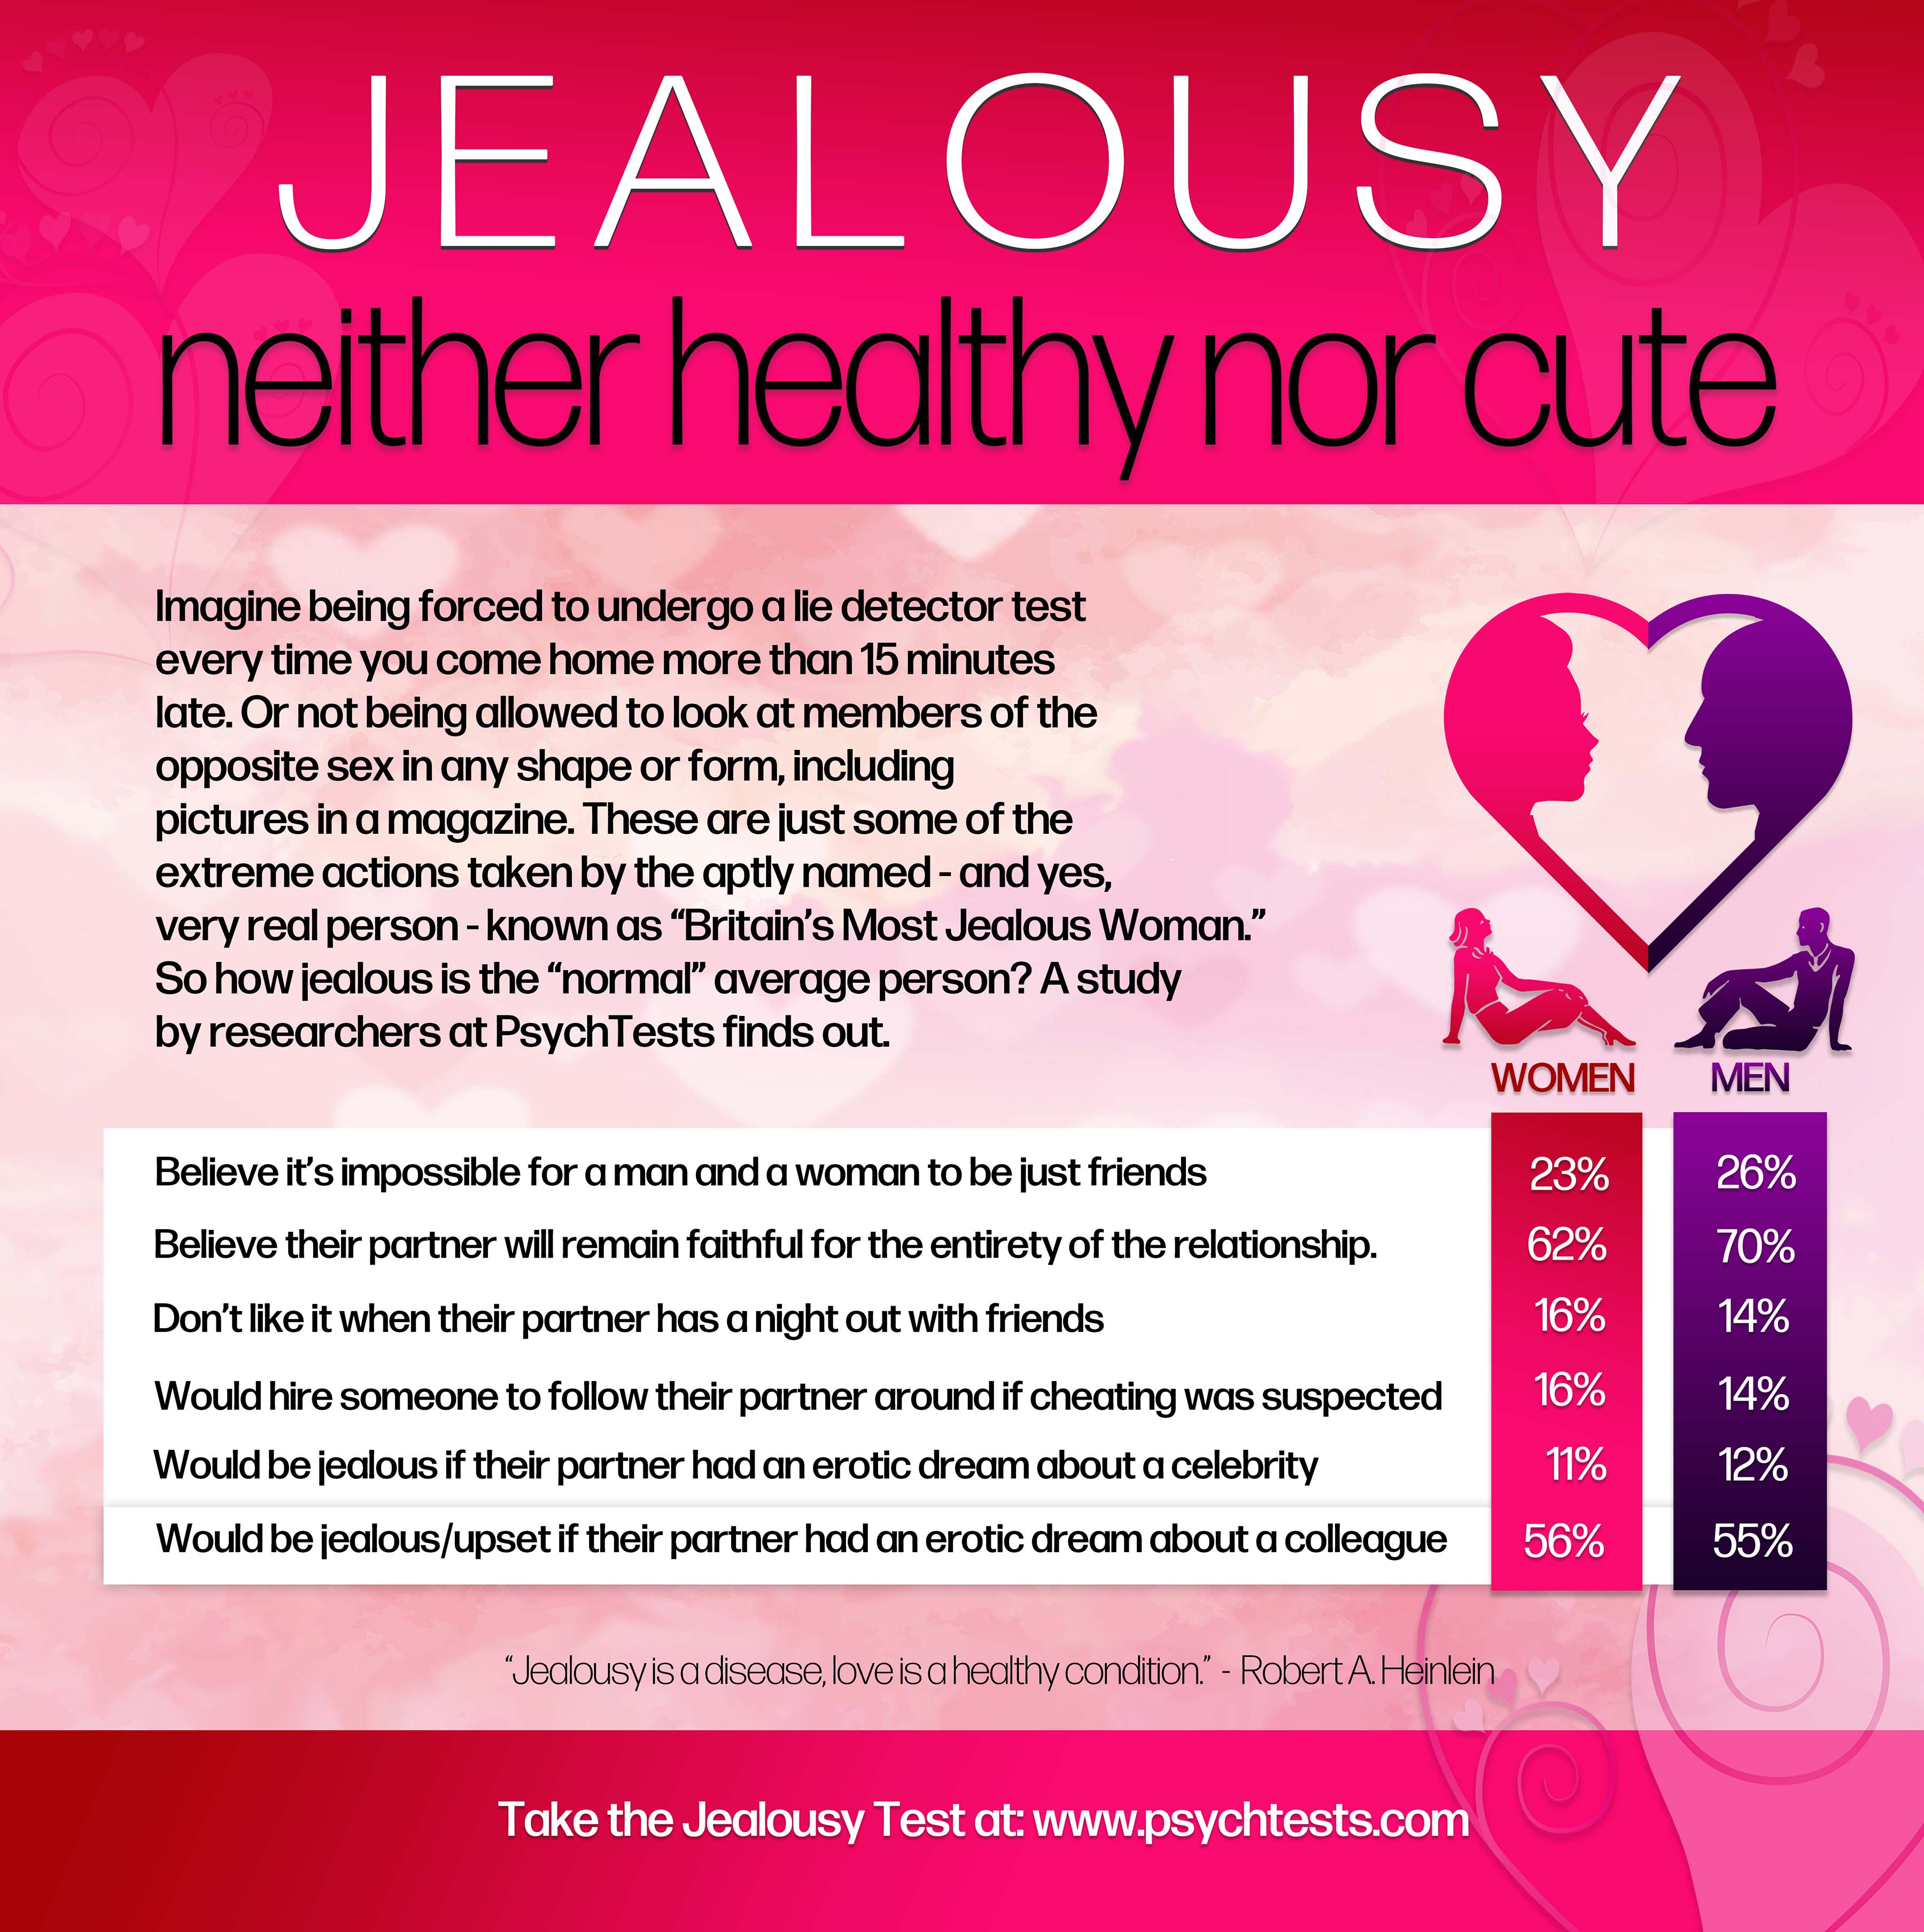 Jealousy issues and self-esteem issues are always intertwined.